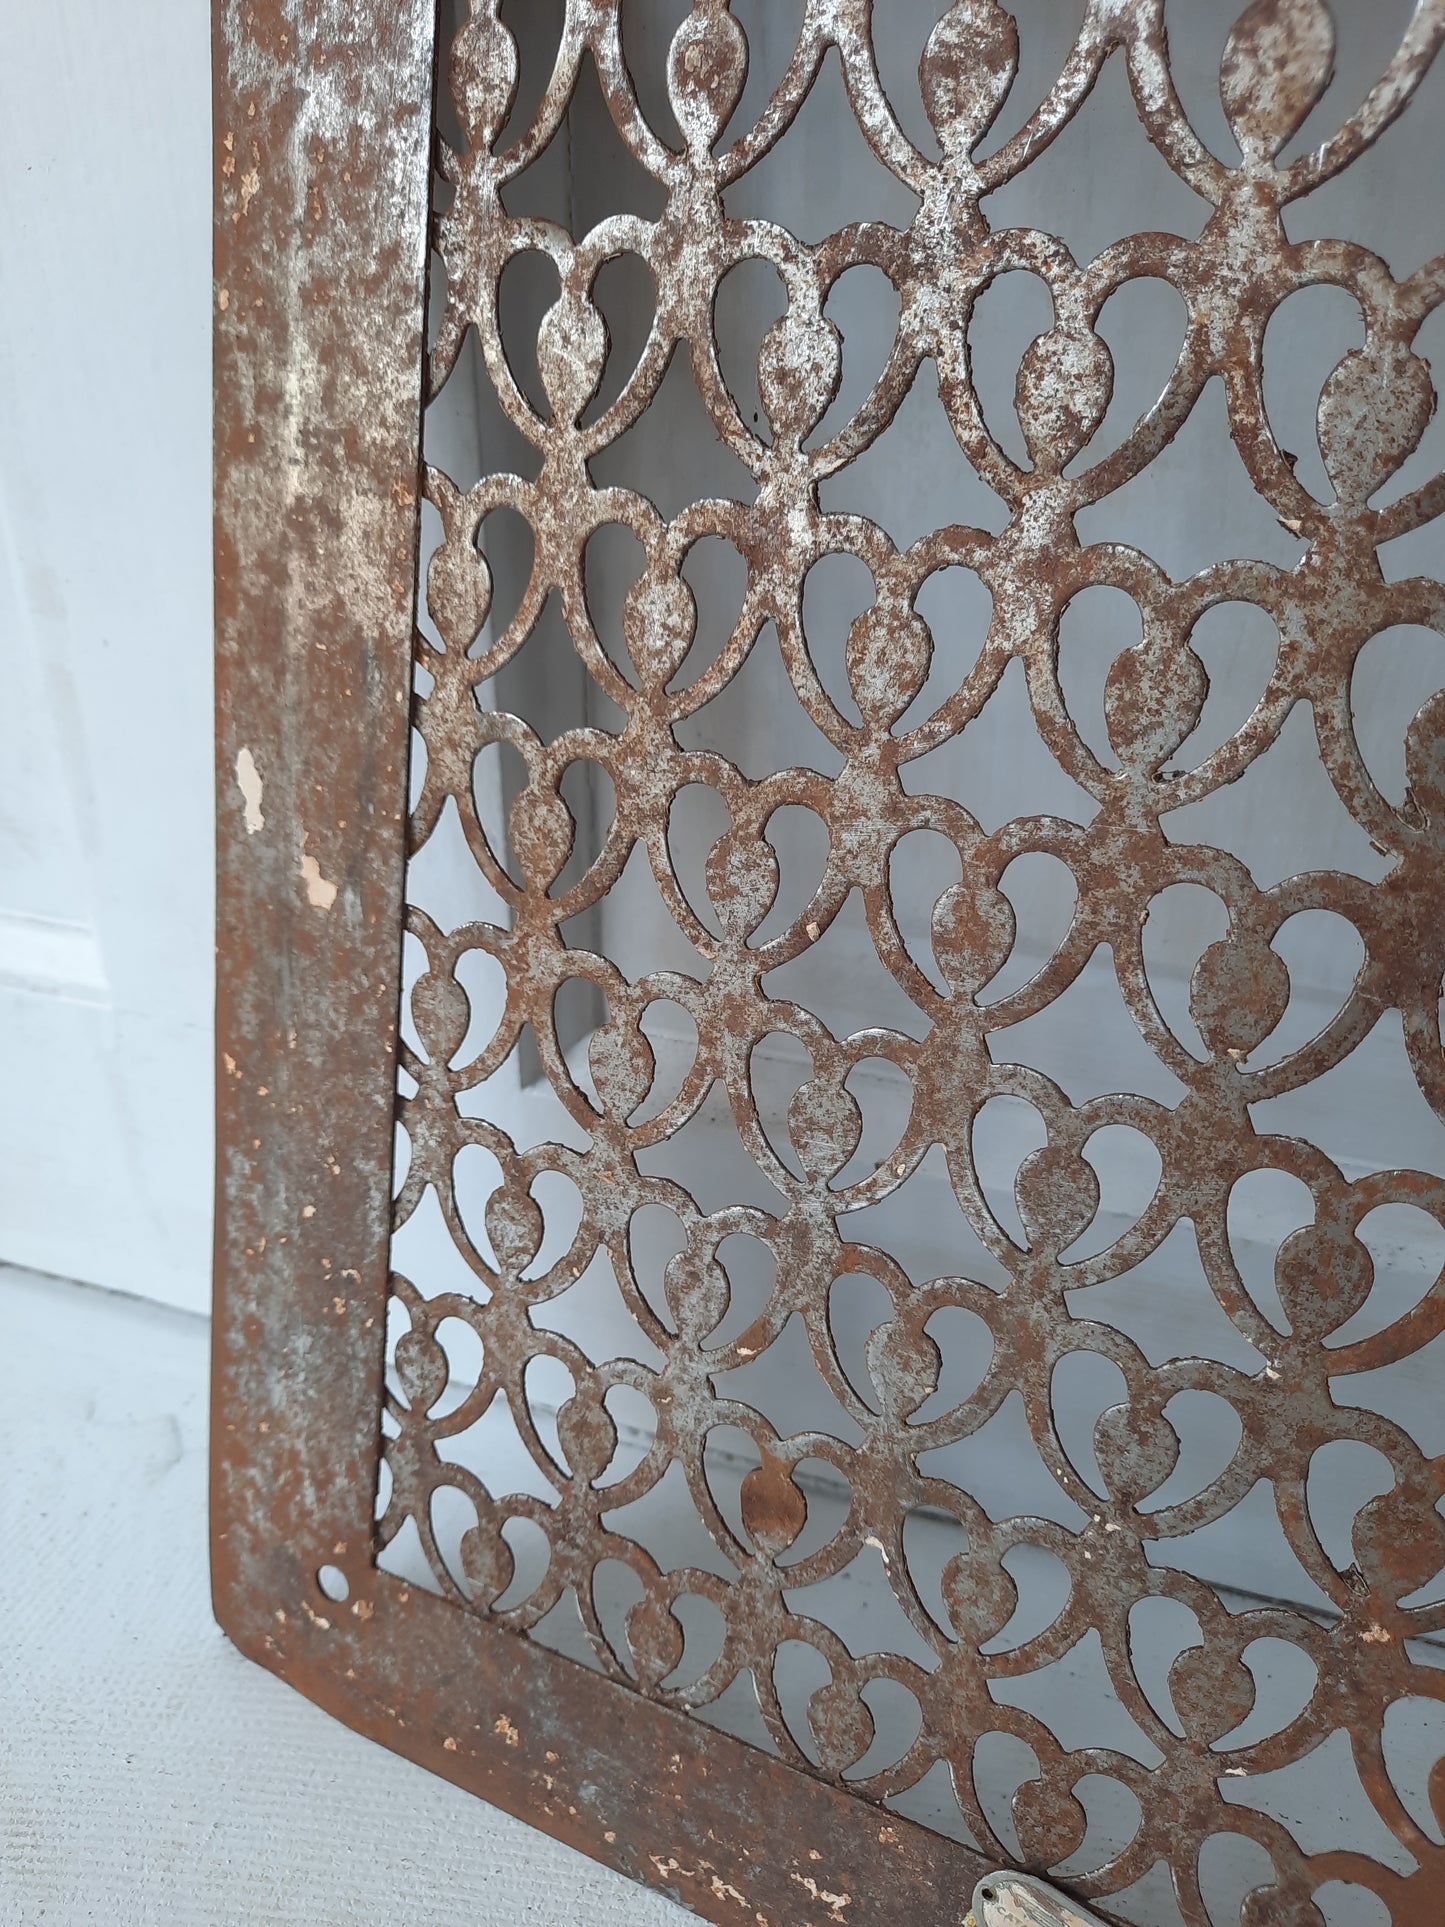 Vintage Rustic Stamped Metal Vent Cover Grate, Retro Metal Cut Out Grate 091904